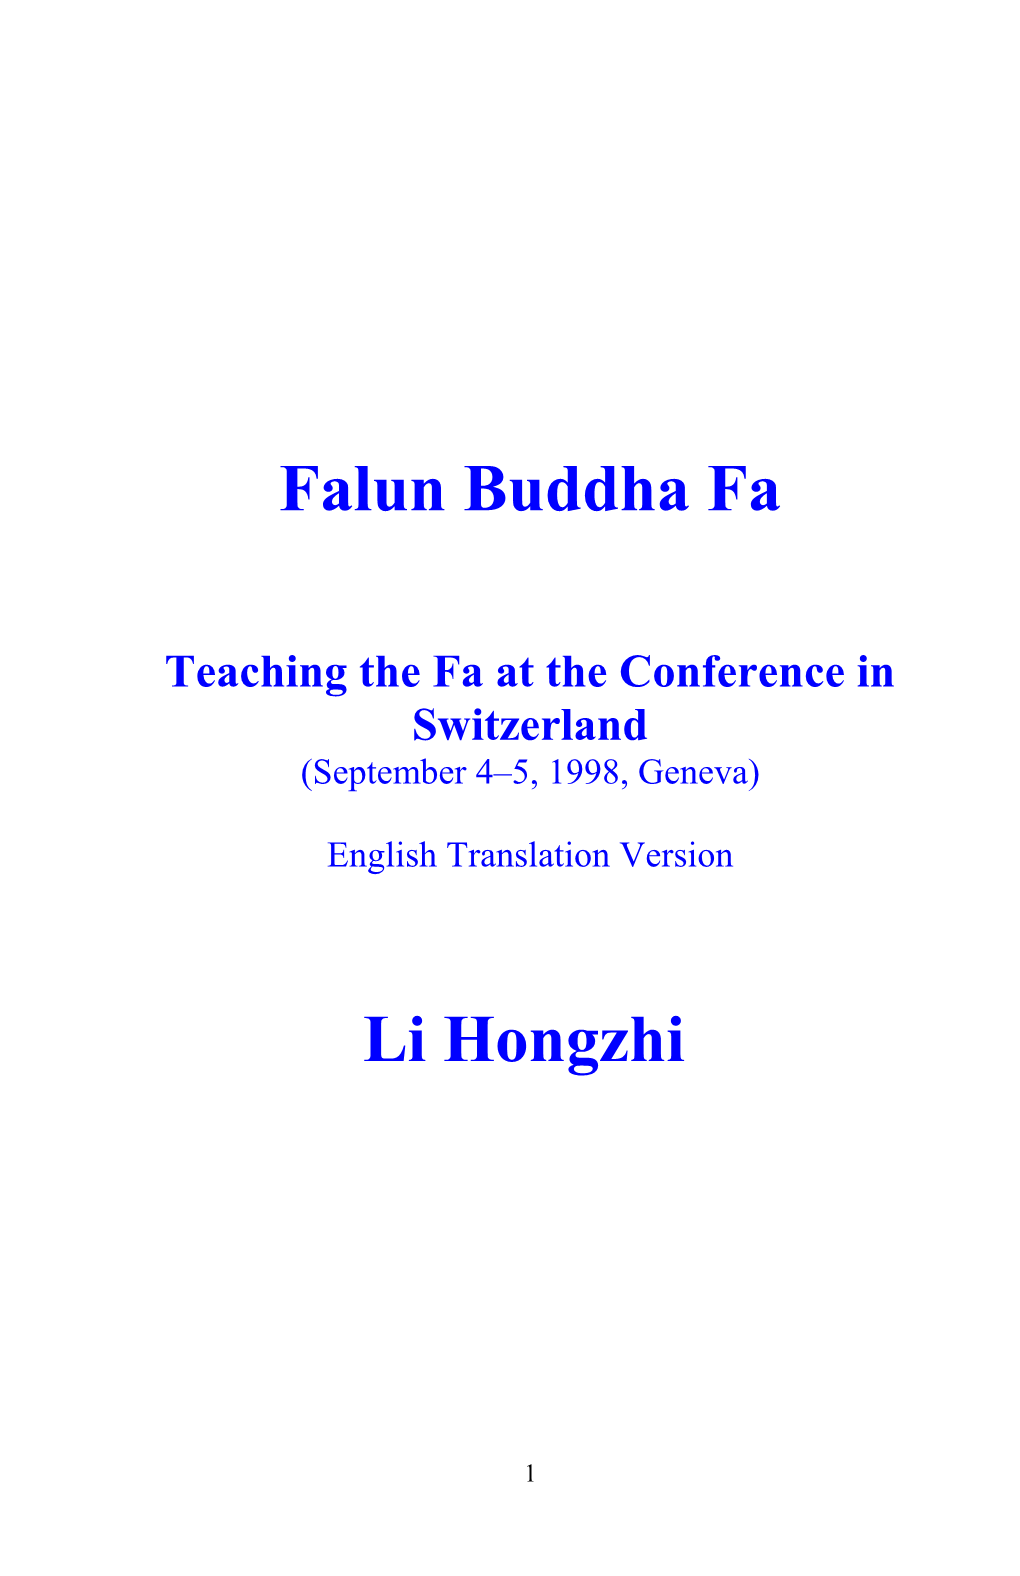 Lectures at the Fa Conference in Switzerland